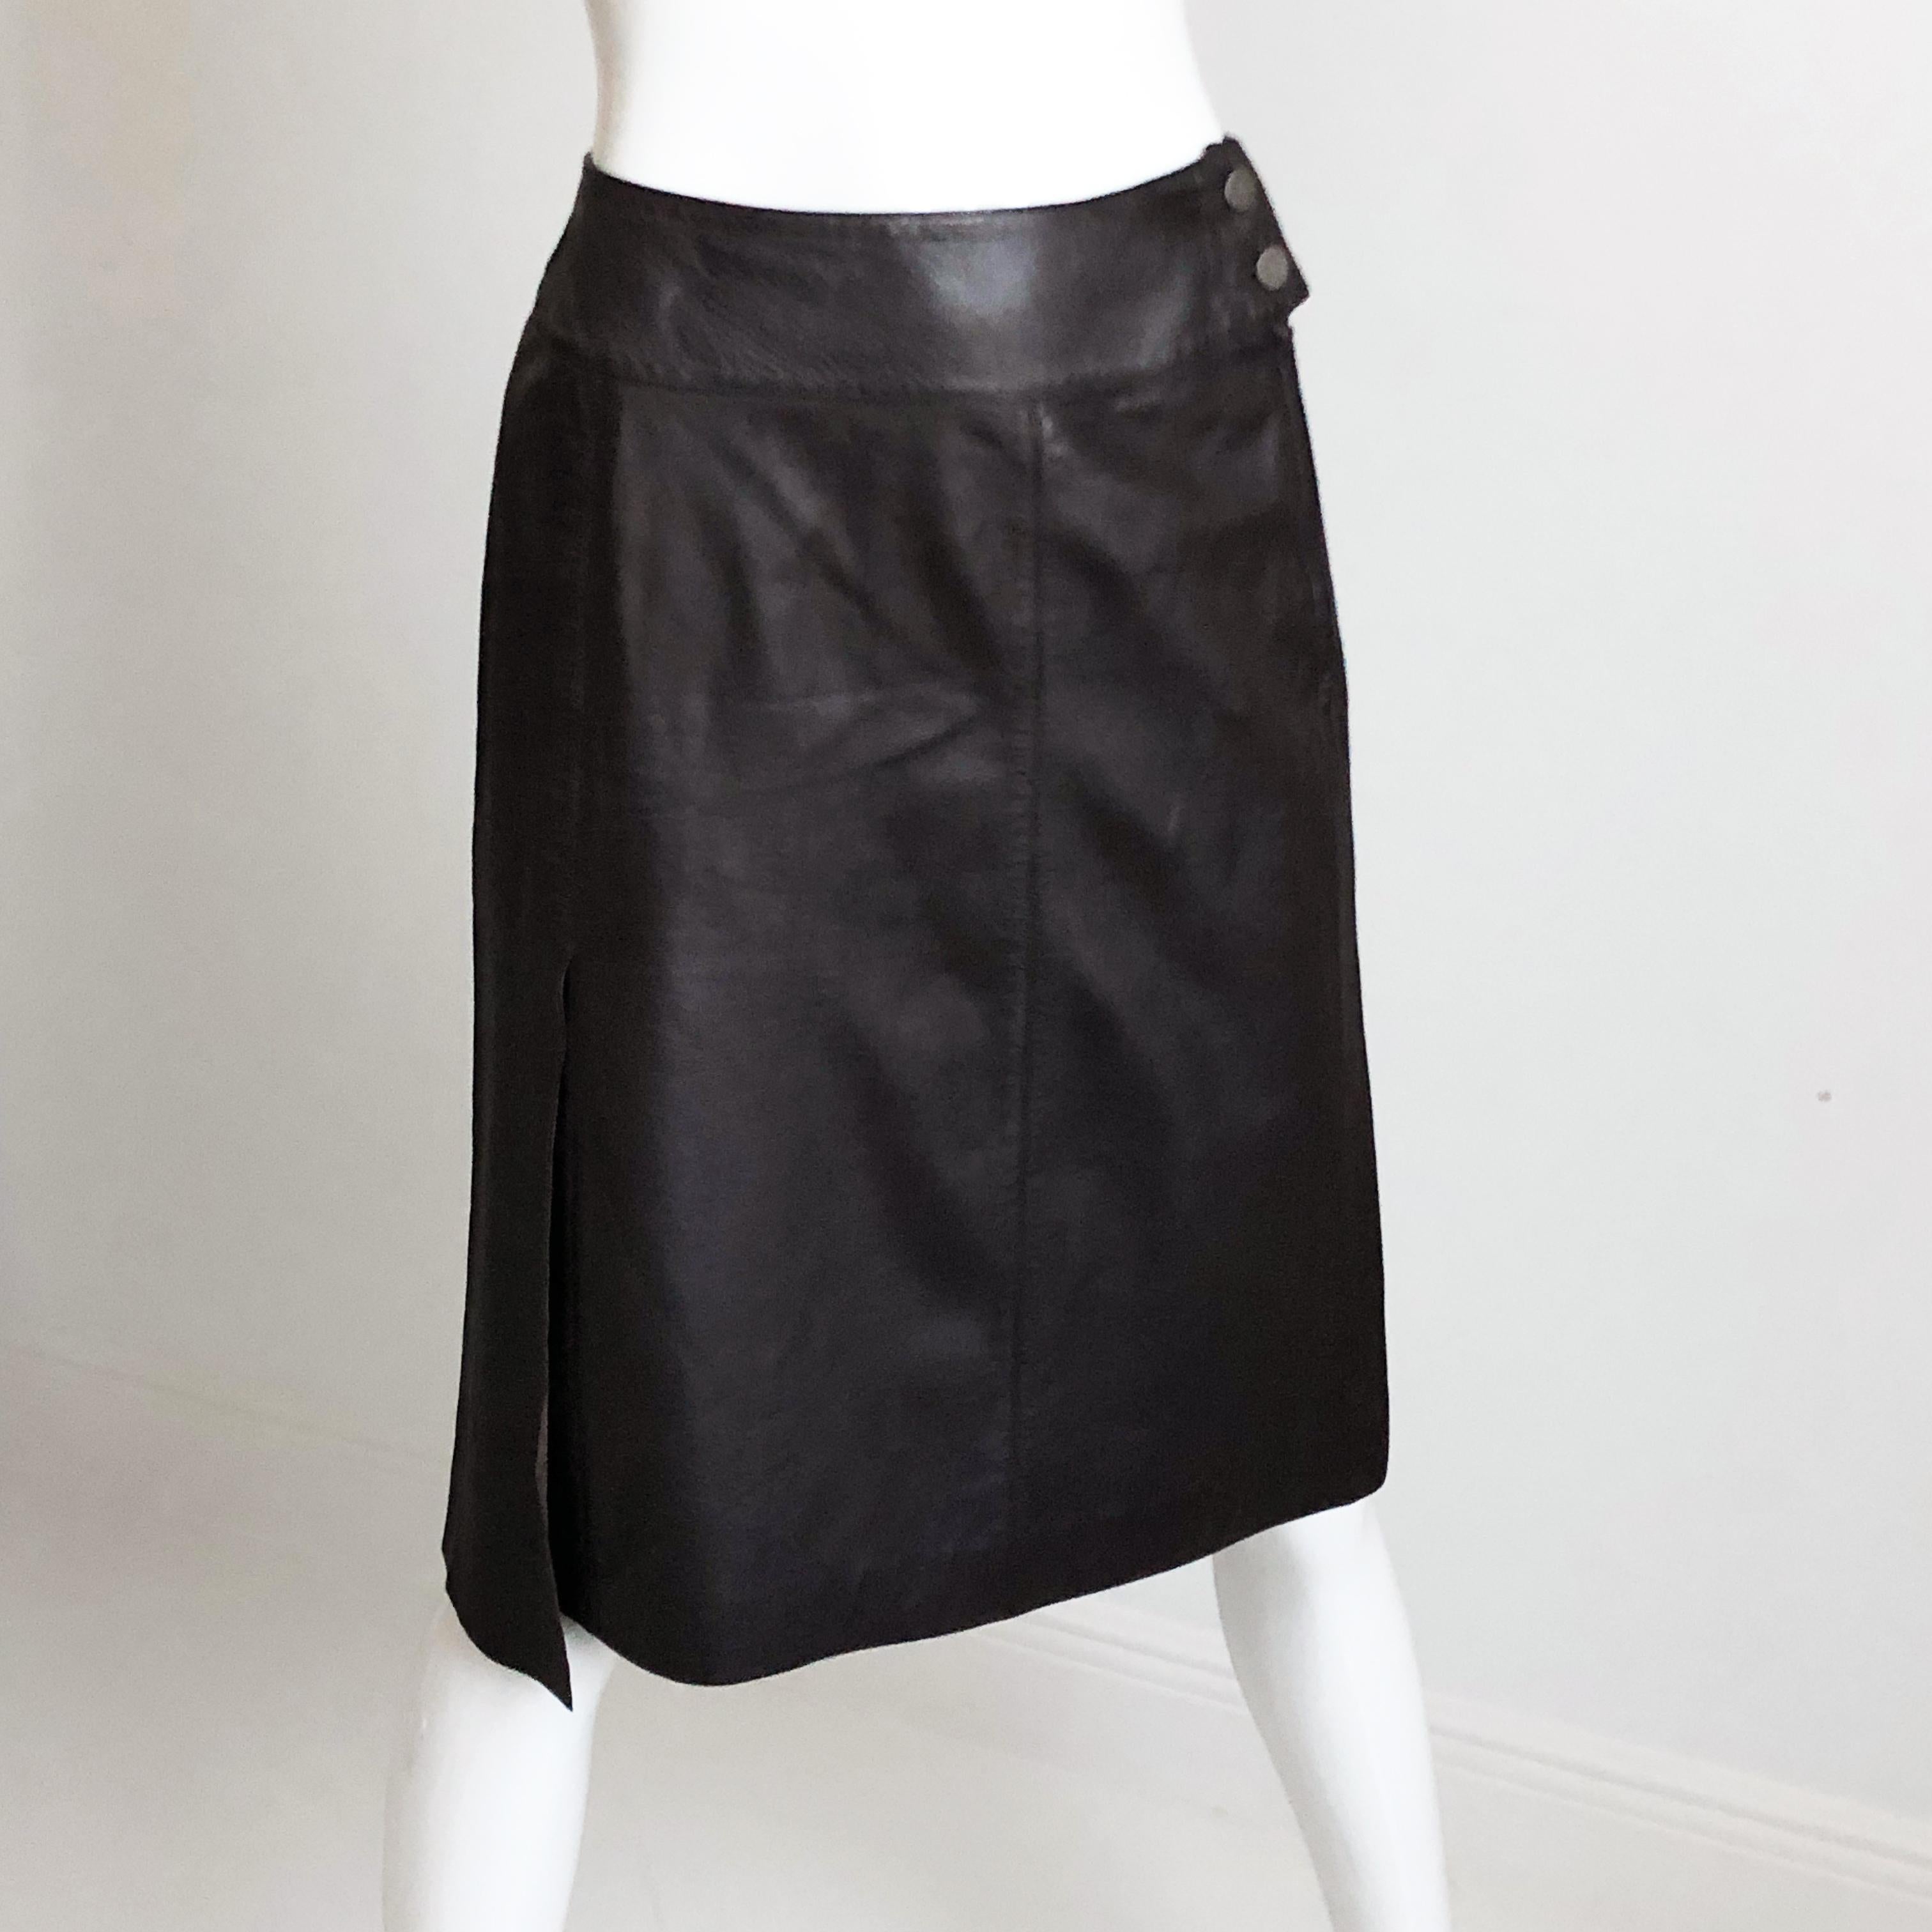 Authentic, preowned Chanel mocha brown lambskin leather skirt, size 36 from the 99P collection . CC logo stamped buttons with hidden zip fastener; fully-lined in silk with an asymmetric vent panel at the wearer's right side. Preowned with minimal